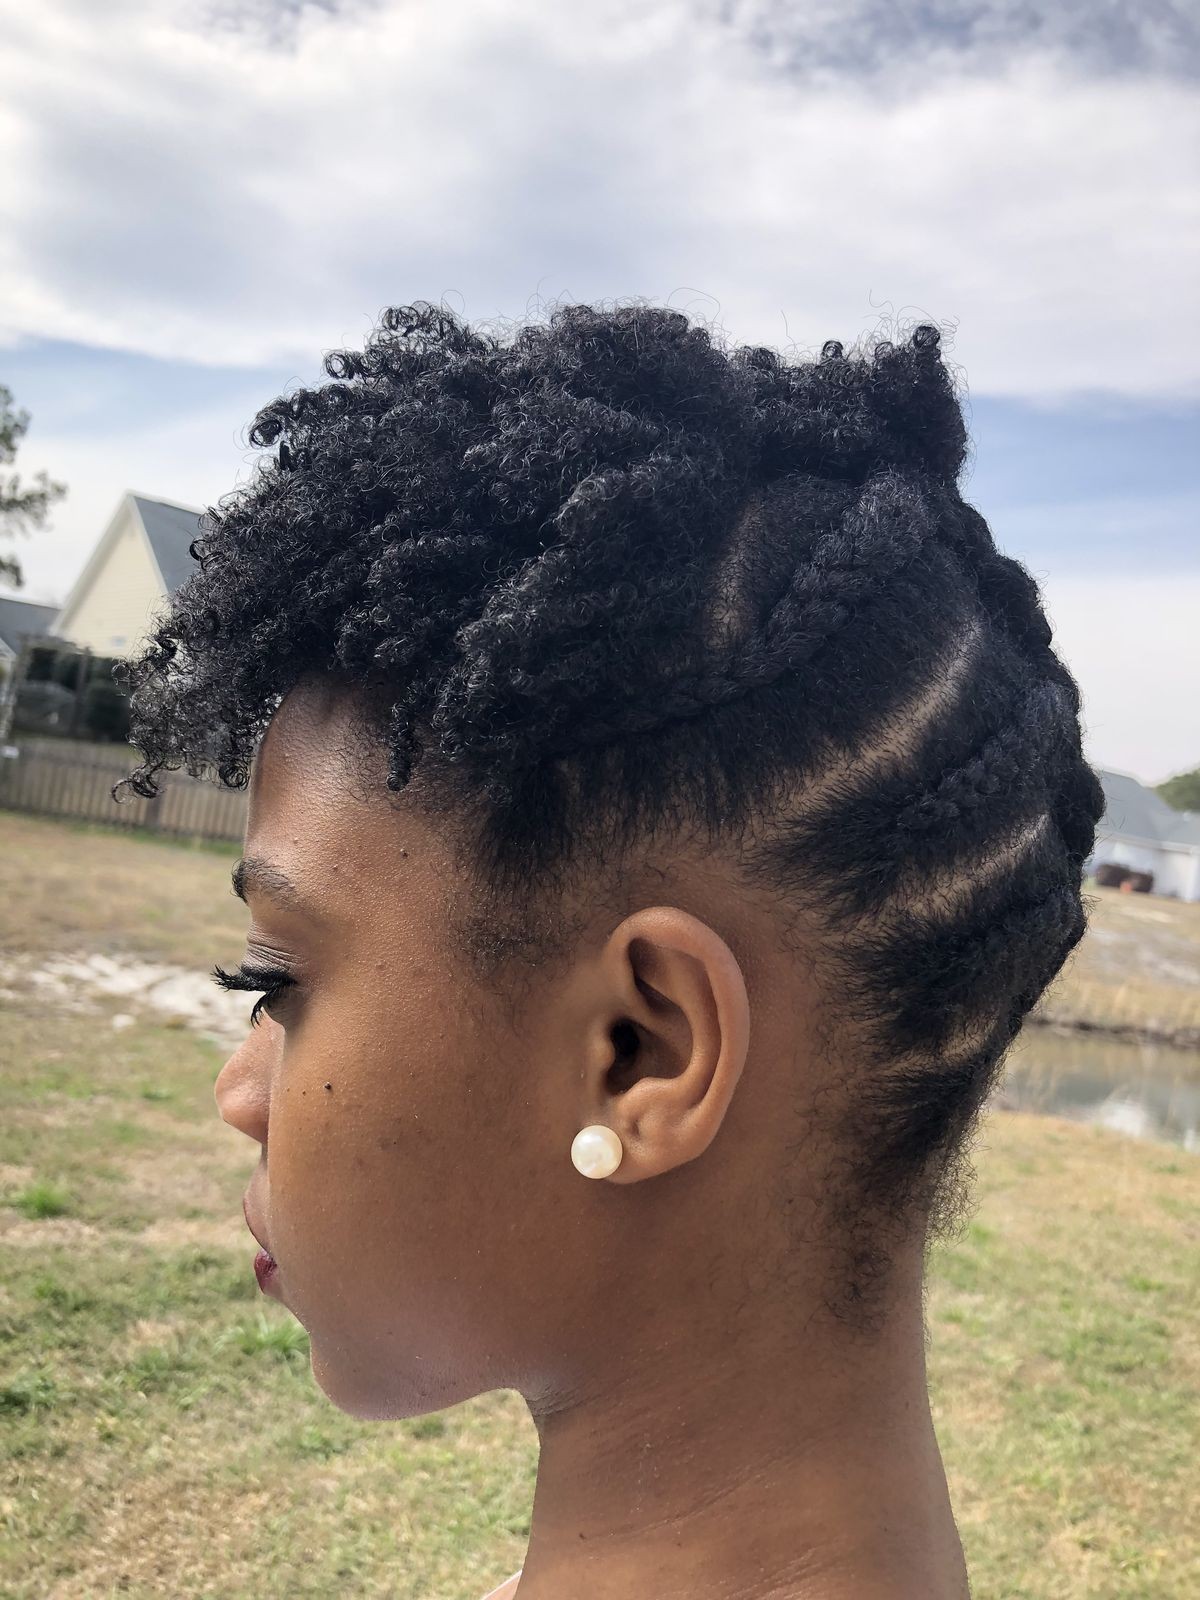 5 Awesome Short Braids Hairstyles for Black Women that is Easy to Do 29360b97dd29b2329a585e7afcb3a951